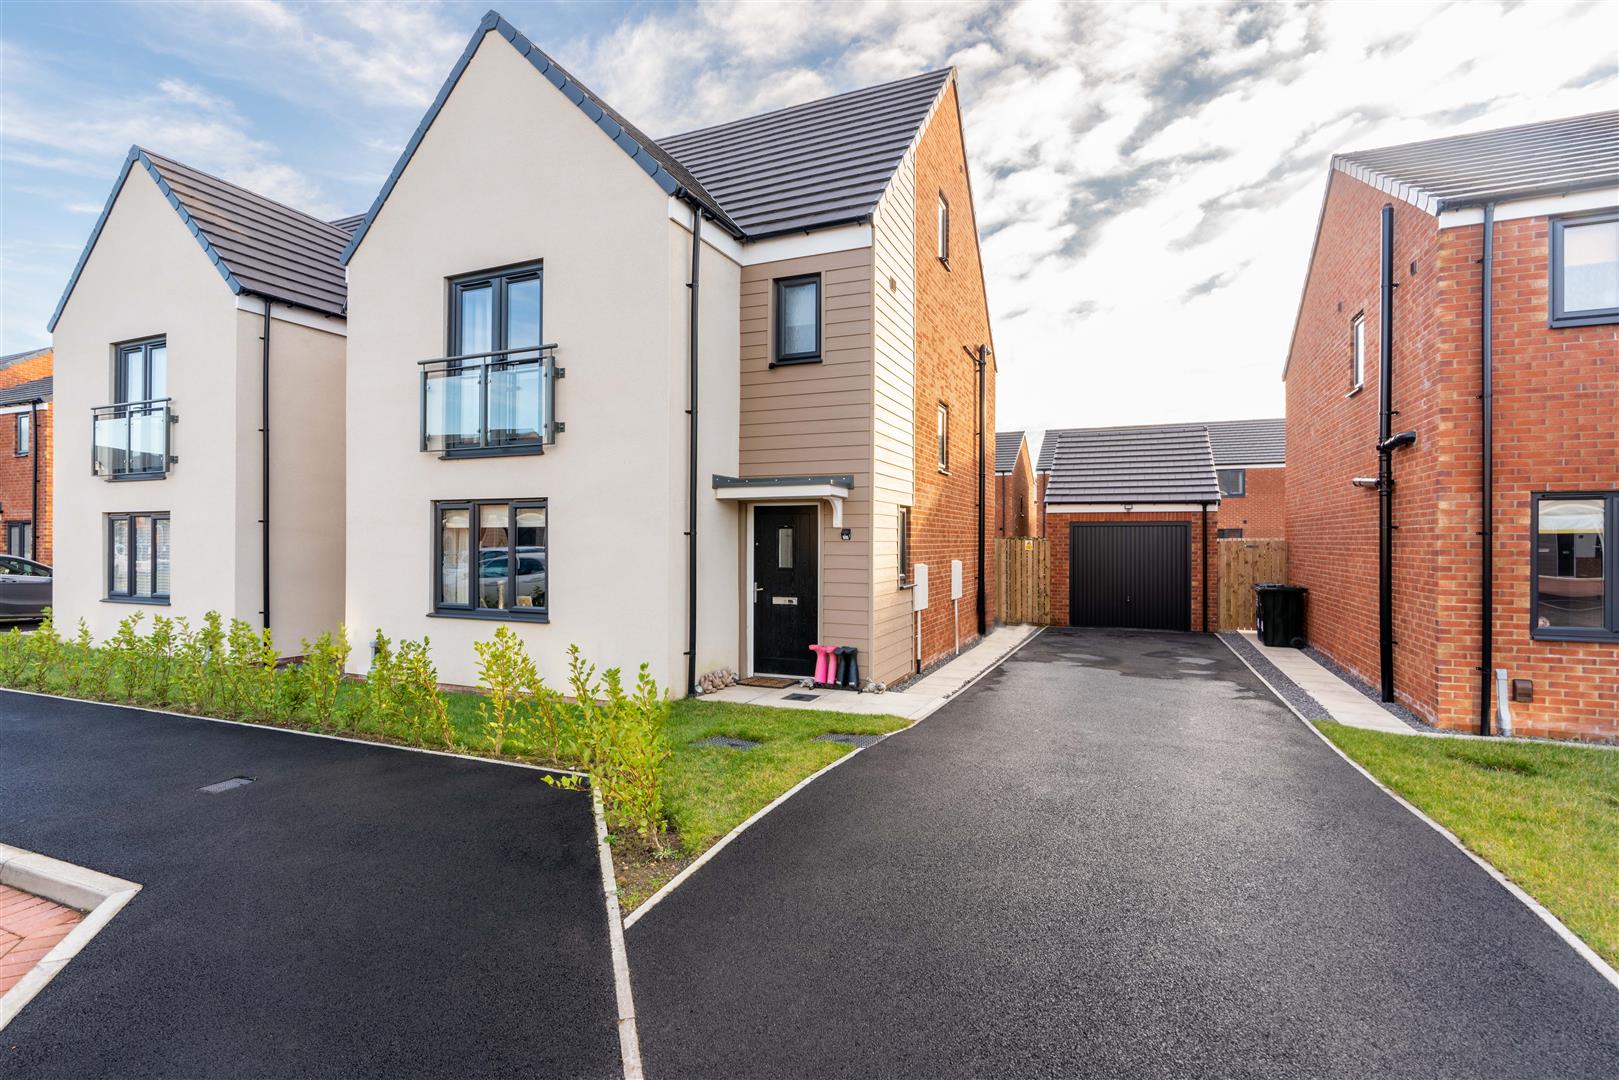 4 bed detached house for sale in Speckledwood Way, Newcastle Upon Tyne, NE13